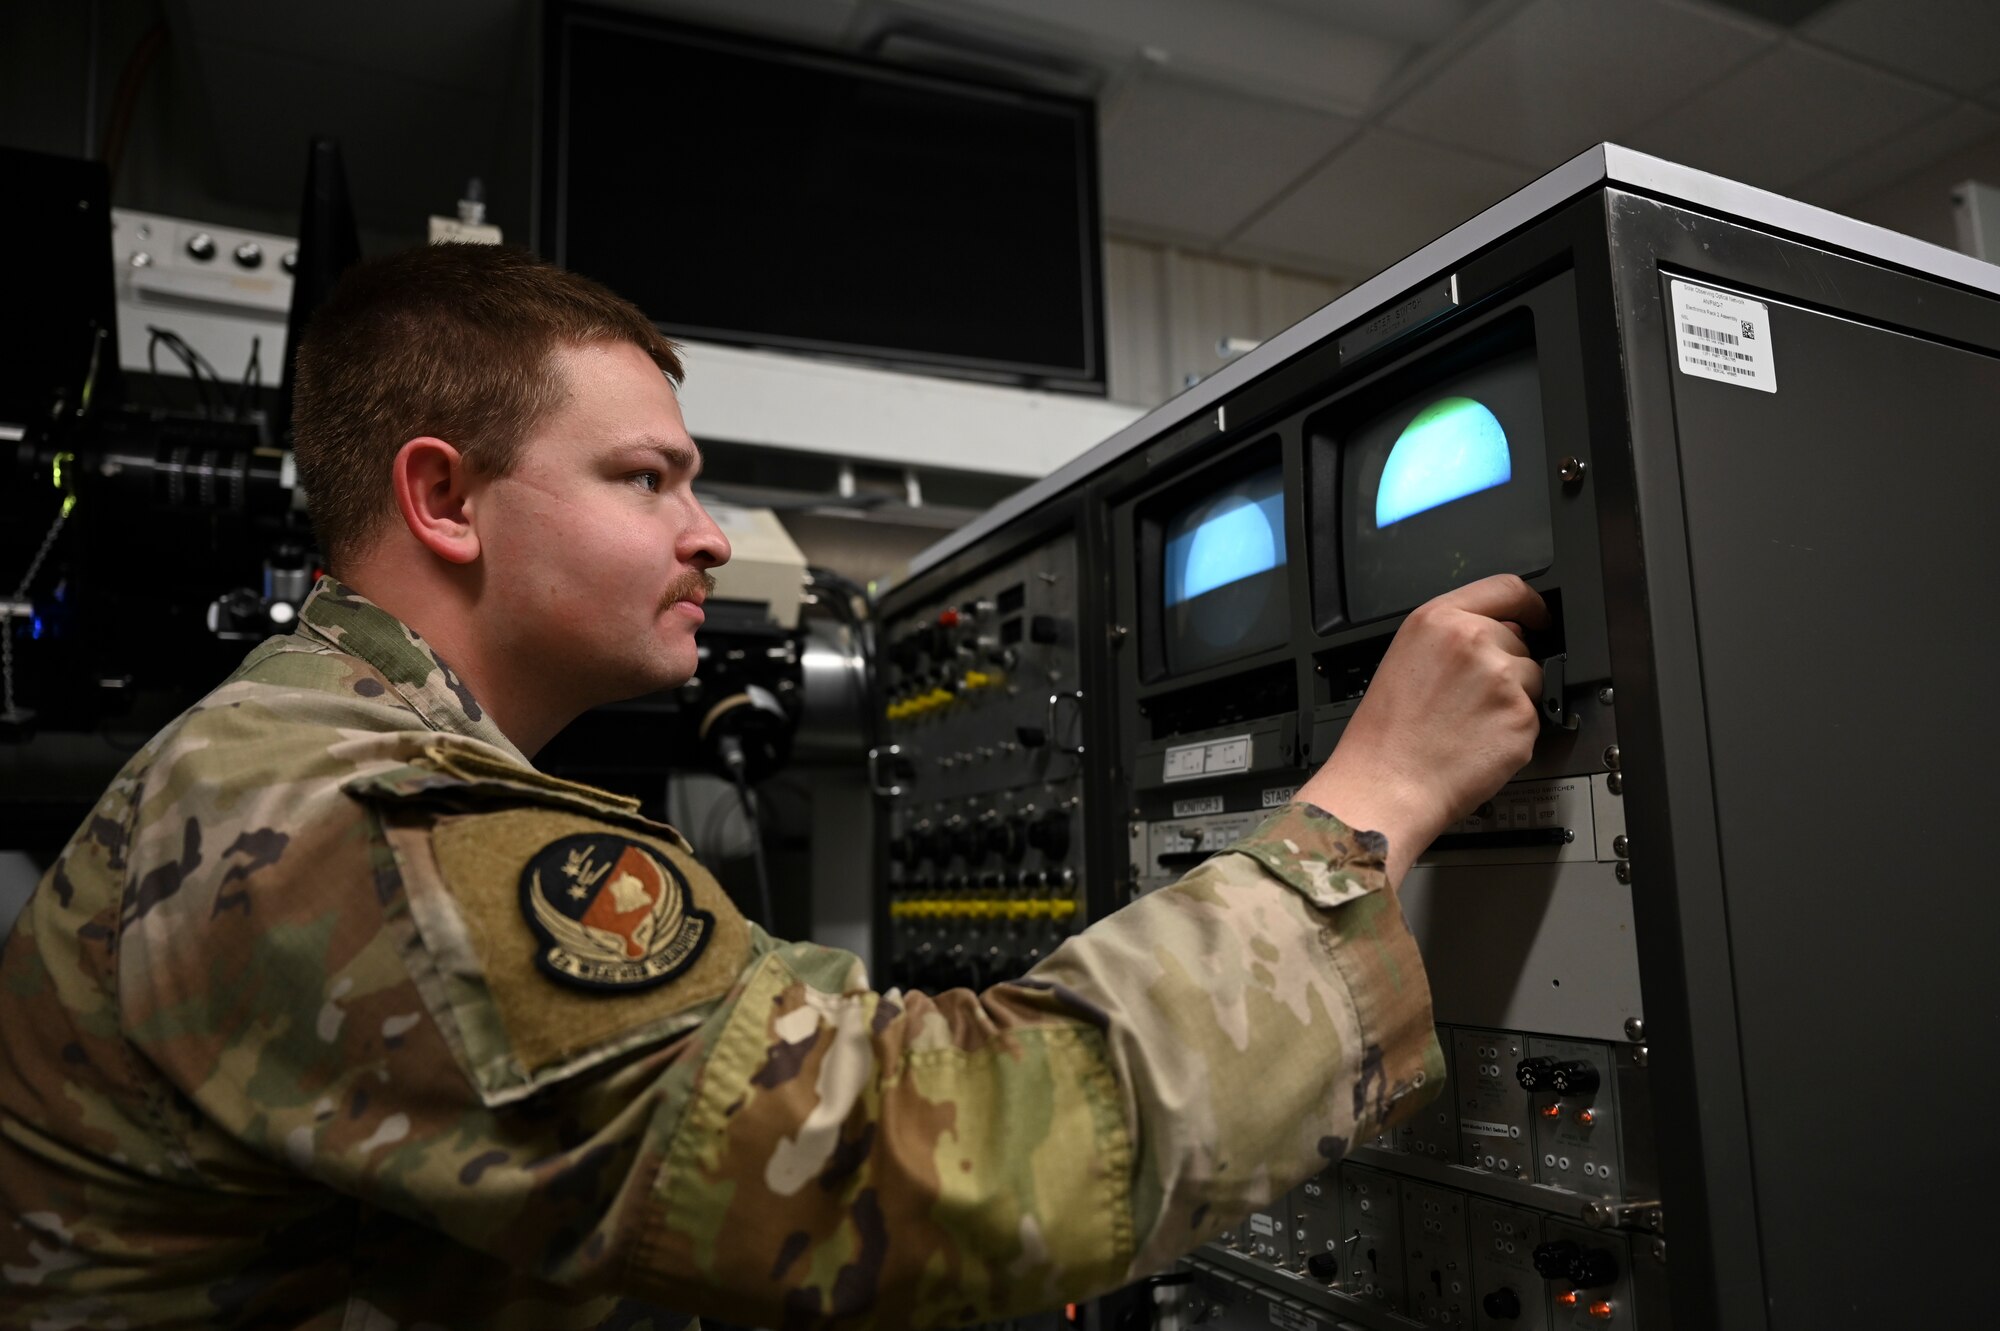 U.S. Air Force Staff Sgt. Colin Bauerle, 2nd Weather Squadron radar airfield and weather systems technician, examines a monitor of the sun at Holloman Air Force Base, New Mexico, Jan. 6, 2023. The primary mission for the 2nd WS is to alert both Holloman and the Air Force of any solar activity that is capable of disrupting both electrical and radio signals. (U.S. Air Force photo by Airman 1st Class Isaiah Pedrazzini)